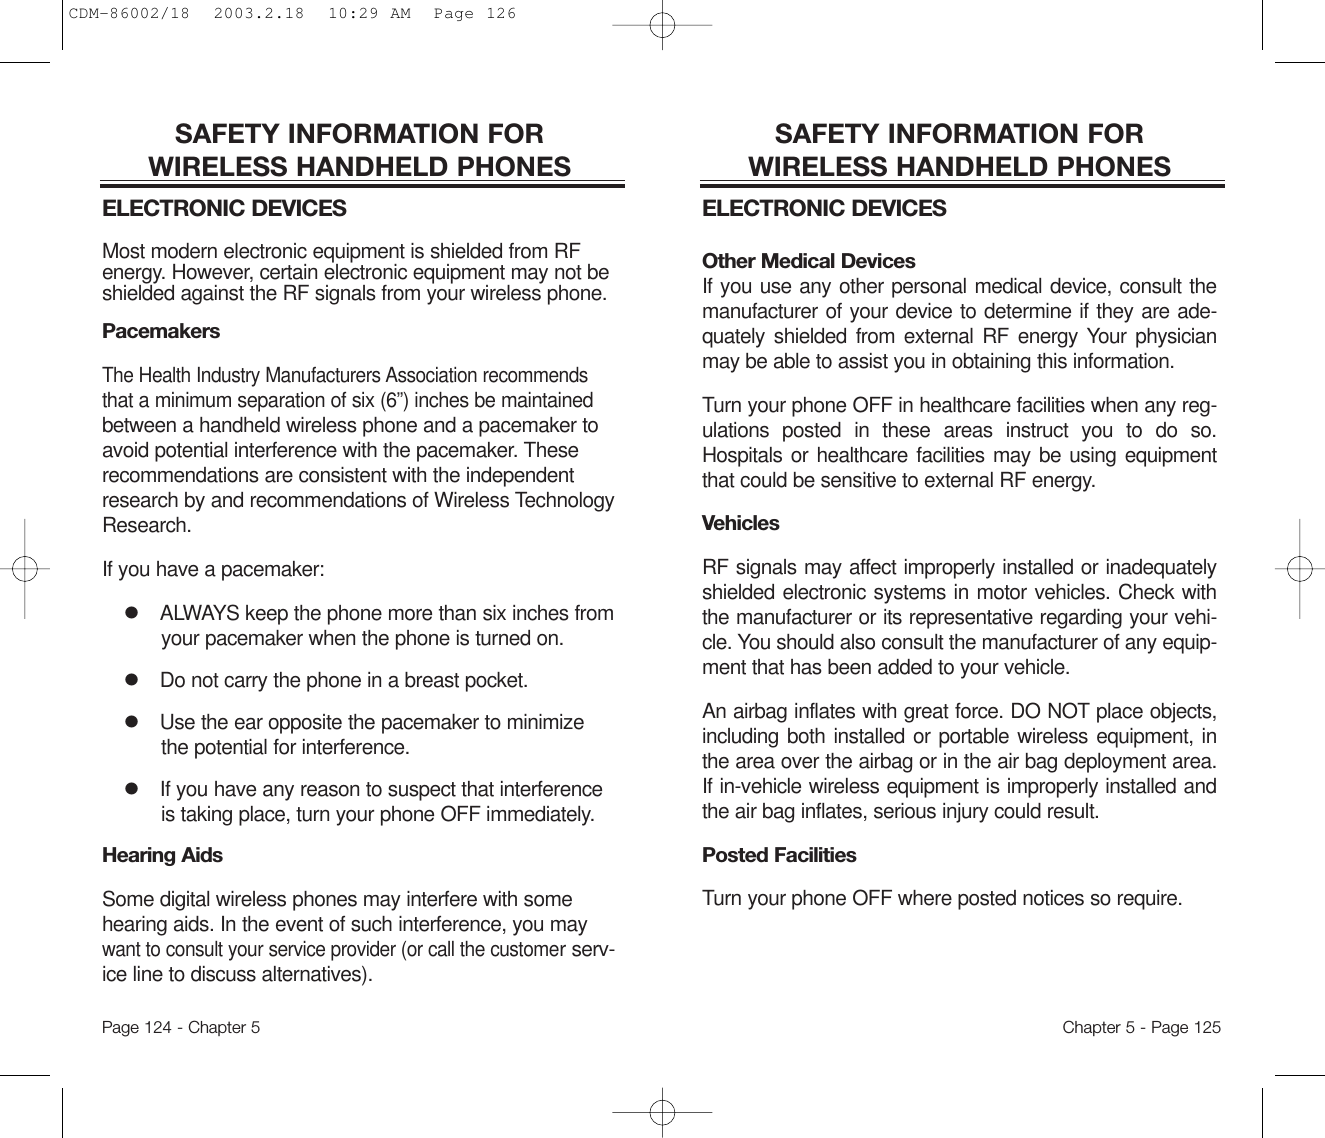 SAFETY INFORMATION FOR WIRELESS HANDHELD PHONESELECTRONIC DEVICESOther Medical DevicesIf you use any other personal medical device, consult themanufacturer of your device to determine if they are ade-quately shielded from external RF energy Your physicianmay be able to assist you in obtaining this information.Turn your phone OFF in healthcare facilities when any reg-ulations posted in these areas instruct you to do so.Hospitals or healthcare facilities may be using equipmentthat could be sensitive to external RF energy.VehiclesRF signals may affect improperly installed or inadequatelyshielded electronic systems in motor vehicles. Check withthe manufacturer or its representative regarding your vehi-cle. You should also consult the manufacturer of any equip-ment that has been added to your vehicle.An airbag inflates with great force. DO NOT place objects,including both installed or portable wireless equipment, inthe area over the airbag or in the air bag deployment area.If in-vehicle wireless equipment is improperly installed andthe air bag inflates, serious injury could result.Posted FacilitiesTurn your phone OFF where posted notices so require.Chapter 5 - Page 125SAFETY INFORMATION FOR WIRELESS HANDHELD PHONESELECTRONIC DEVICESMost modern electronic equipment is shielded from RFenergy. However, certain electronic equipment may not beshielded against the RF signals from your wireless phone.PacemakersThe Health Industry Manufacturers Association recommendsthat a minimum separation of six (6”) inches be maintainedbetween a handheld wireless phone and a pacemaker toavoid potential interference with the pacemaker. Theserecommendations are consistent with the independentresearch by and recommendations of Wireless TechnologyResearch.If you have a pacemaker:lALWAYS keep the phone more than six inches fromyour pacemaker when the phone is turned on.lDo not carry the phone in a breast pocket.lUse the ear opposite the pacemaker to minimizethe potential for interference.lIf you have any reason to suspect that interferenceis taking place, turn your phone OFF immediately.Hearing AidsSome digital wireless phones may interfere with somehearing aids. In the event of such interference, you maywant to consult your service provider (or call the customer serv-ice line to discuss alternatives).Page 124 - Chapter 5CDM-86002/18  2003.2.18  10:29 AM  Page 126